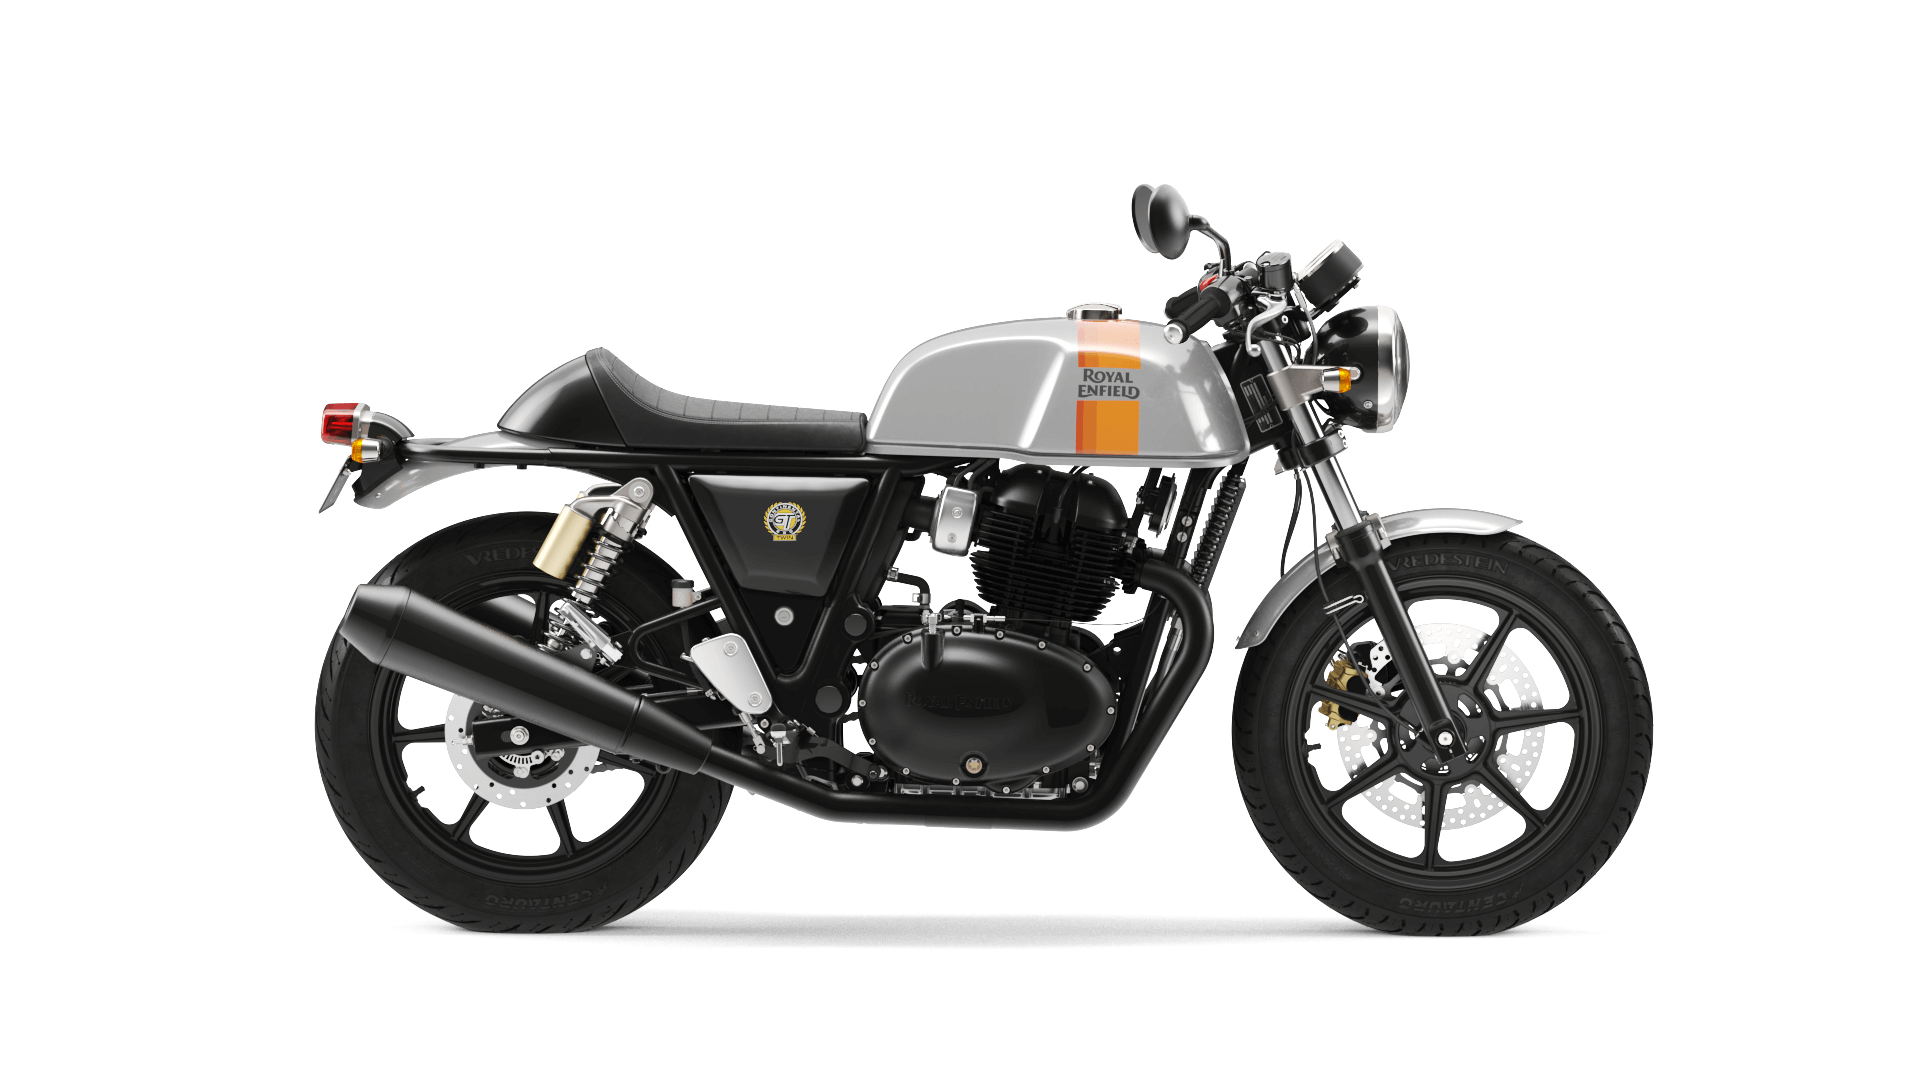 Continental GT 650 Price, Colors & Specification in USA